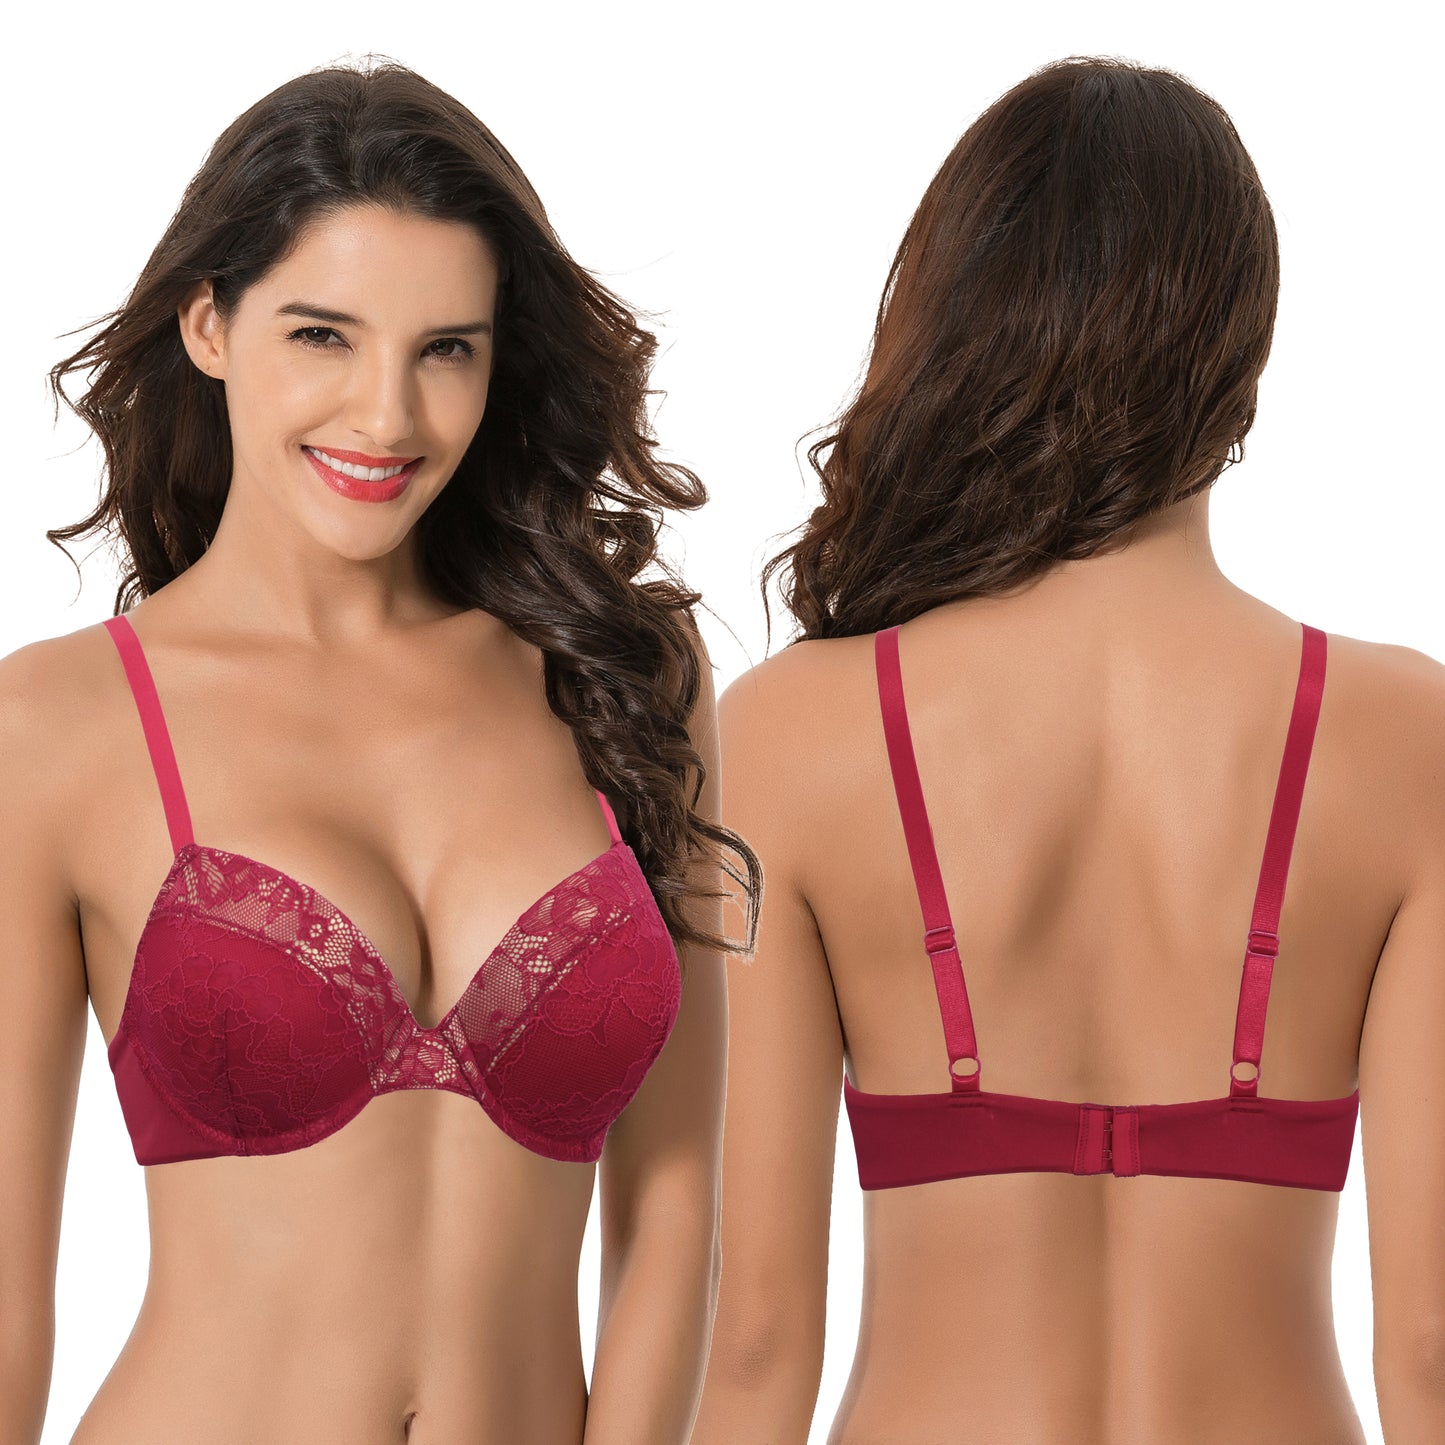 Women's Plus Size Add 1 and a half Cup Push Up Underwire Lace Bras -2PK-BLACK,RED